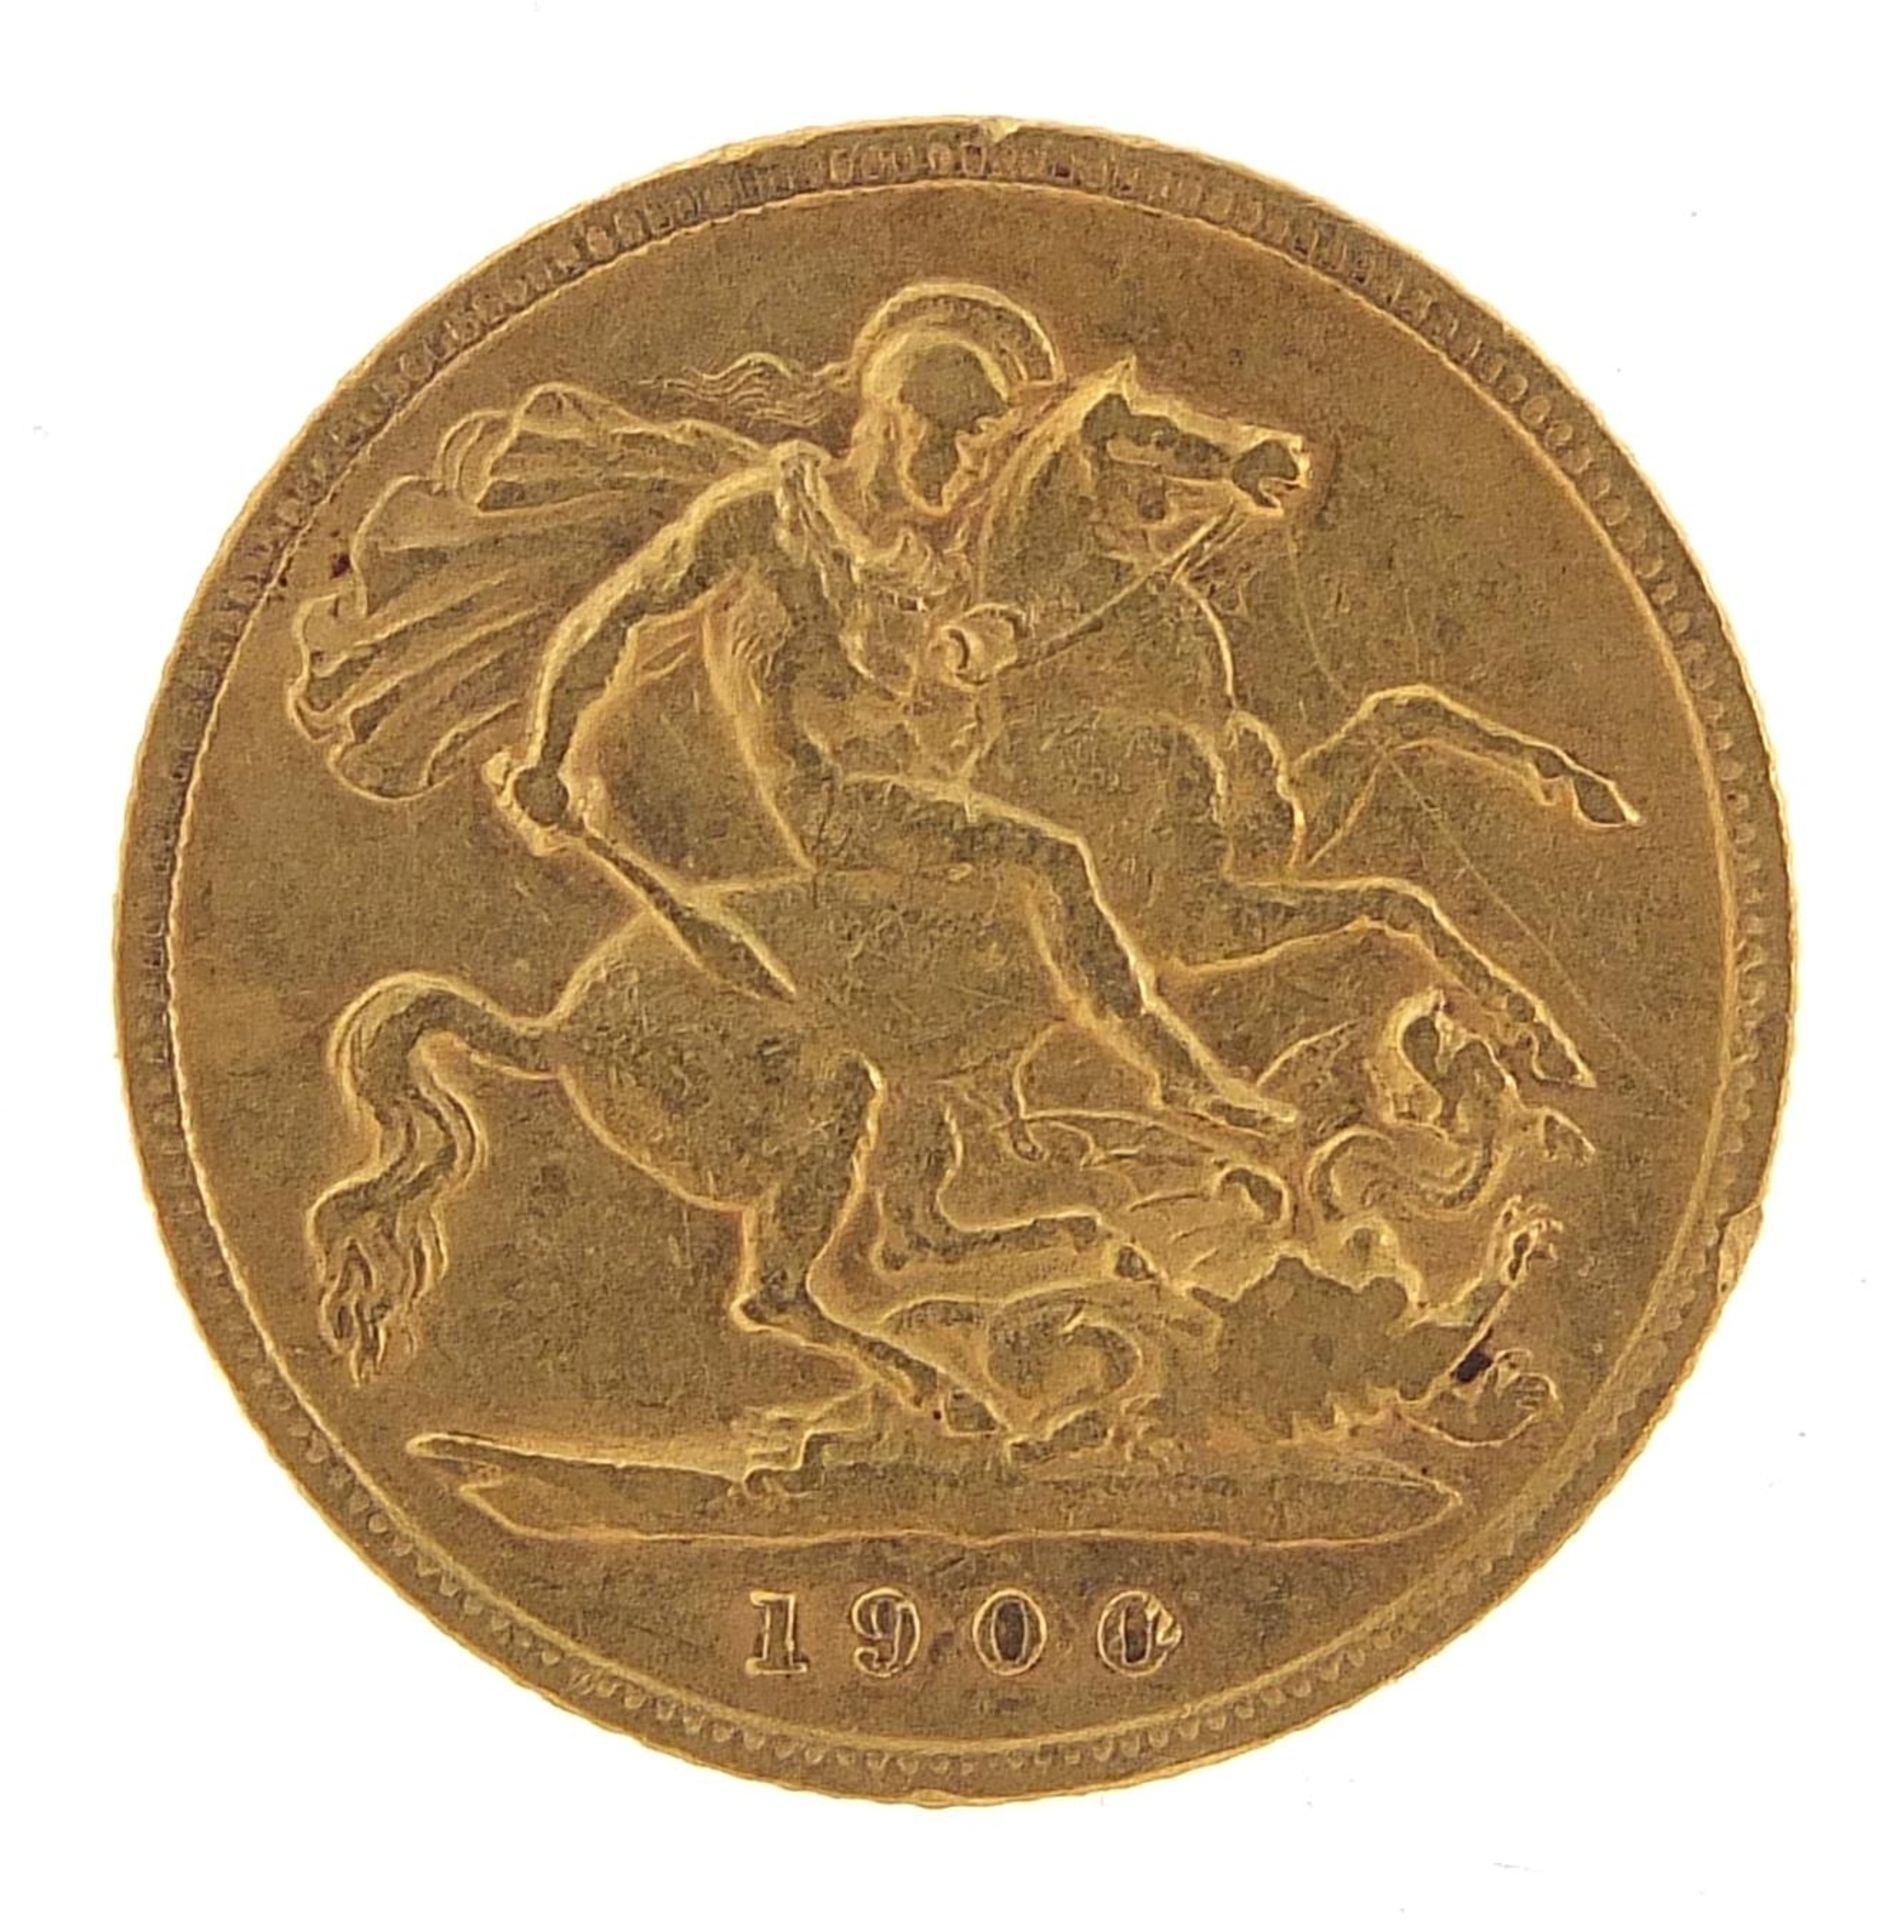 Queen Victoria 1900 gold half sovereign - this lot is sold without buyer's premium